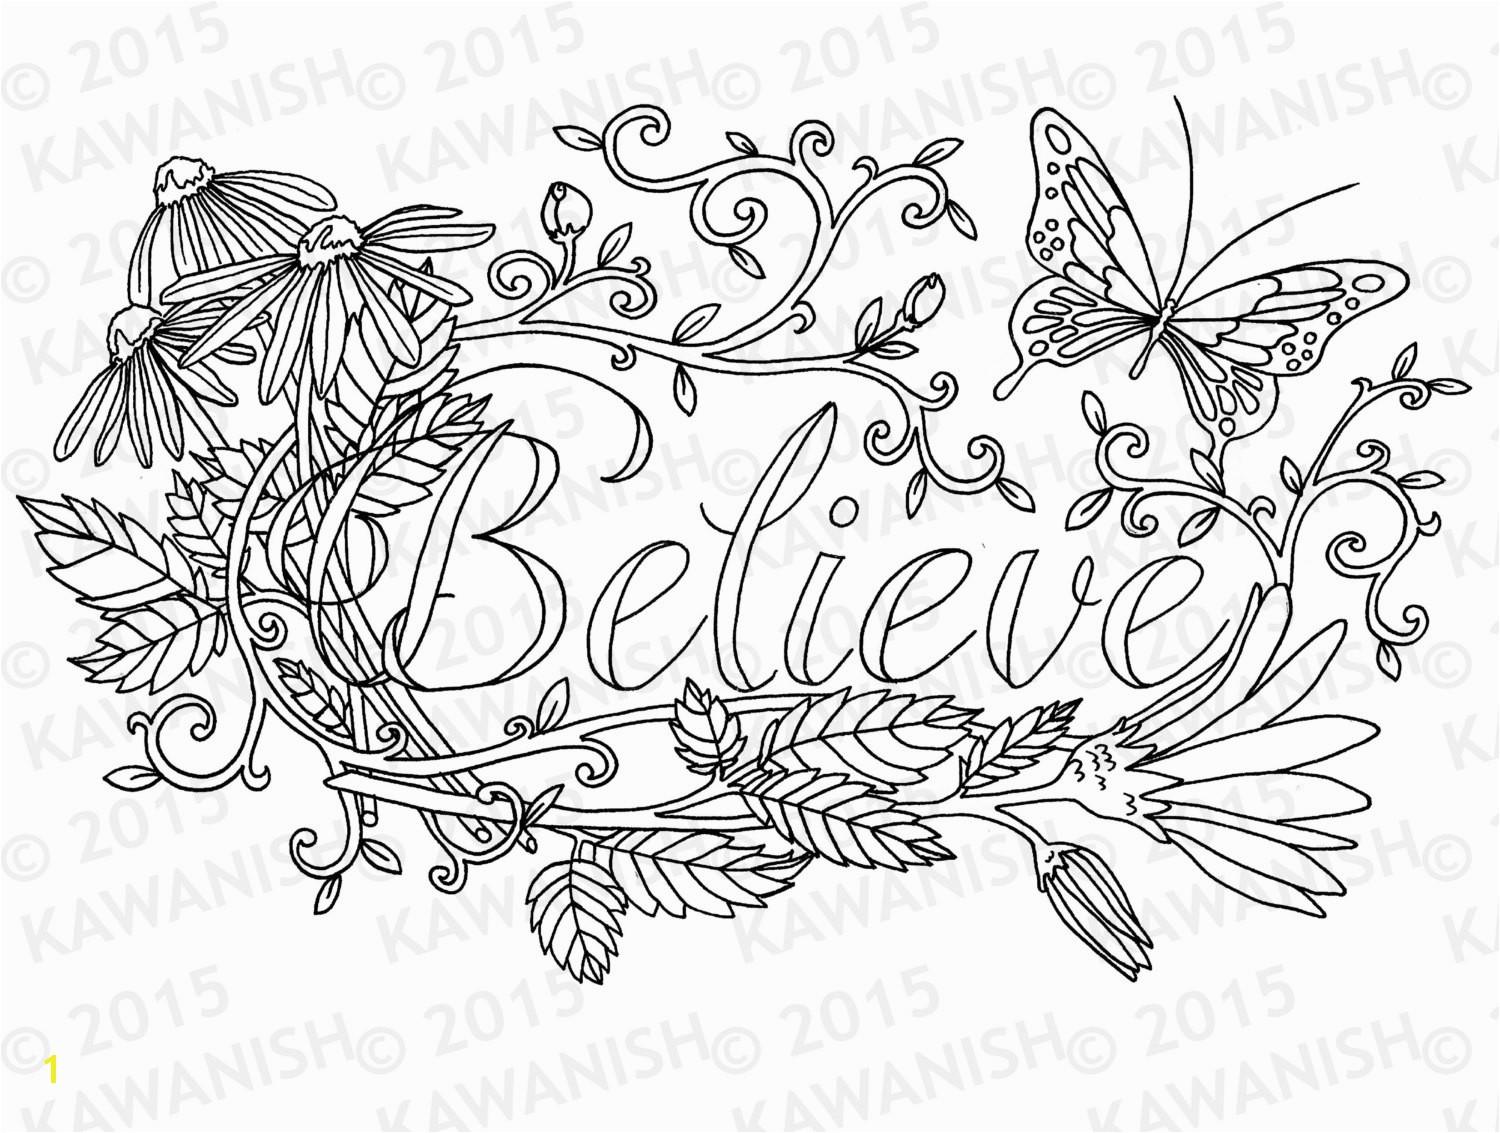 Printable Adult Coloring Pages